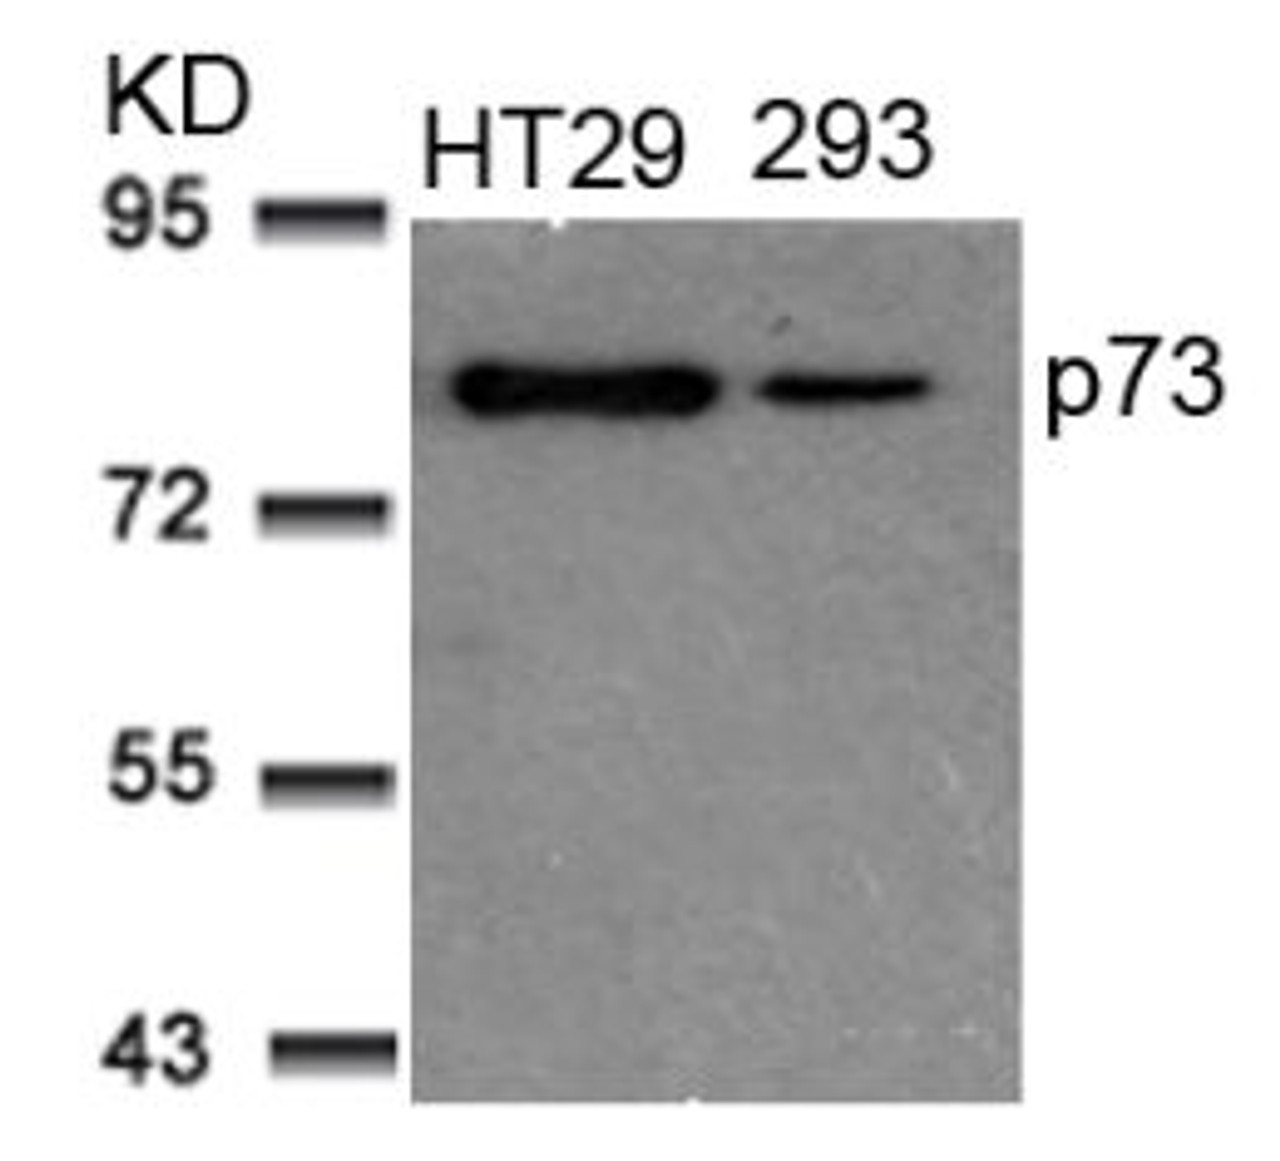 Western blot analysis of lysed extracts from HT29 and 293 cells using p73 (Ab-99) .